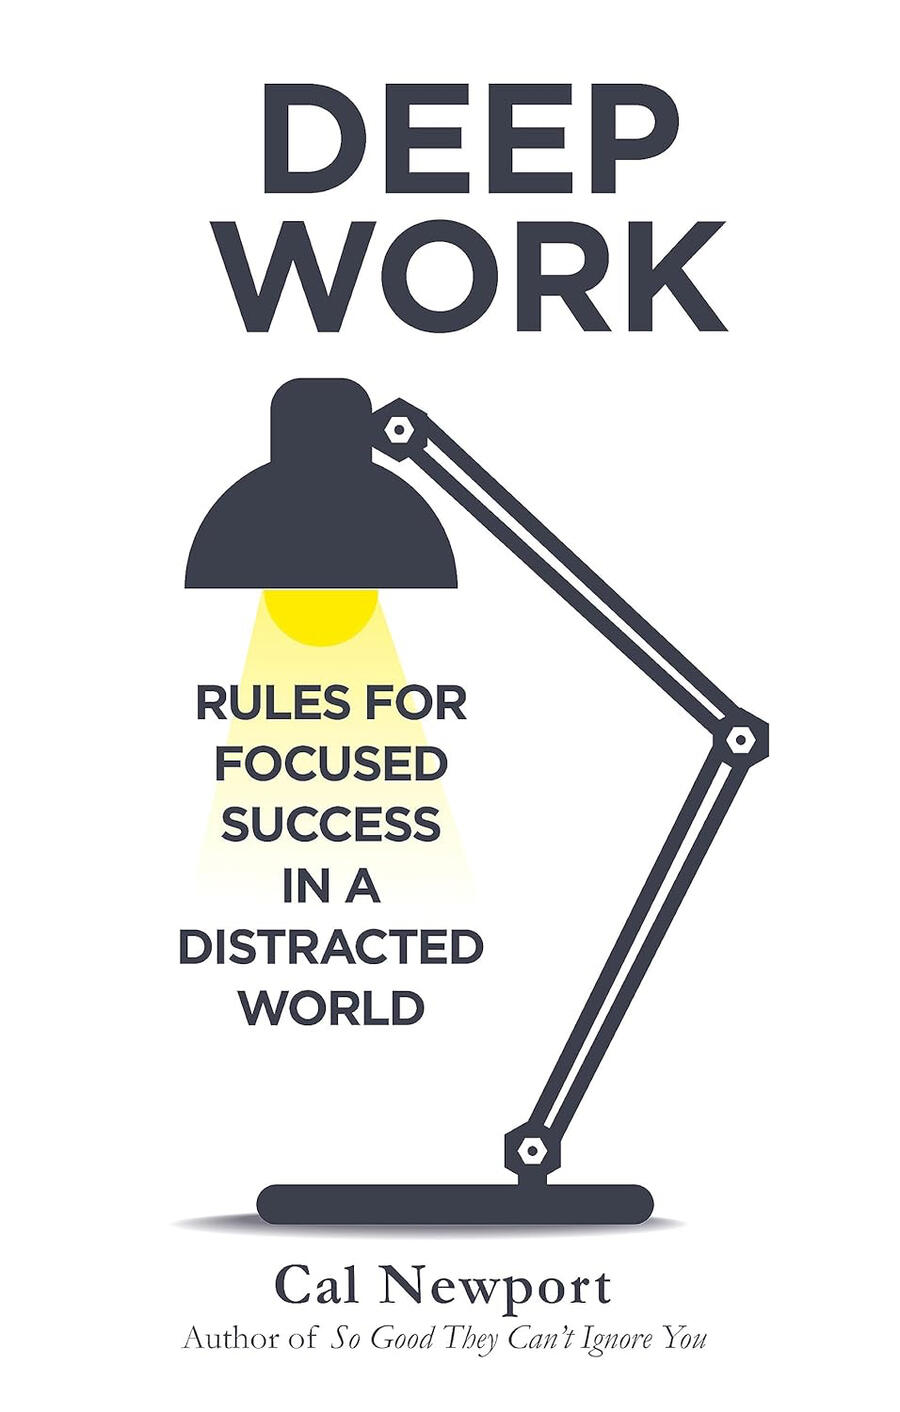 Deep Work - Rules For Focused Success In A Distracted World by Cal Newport